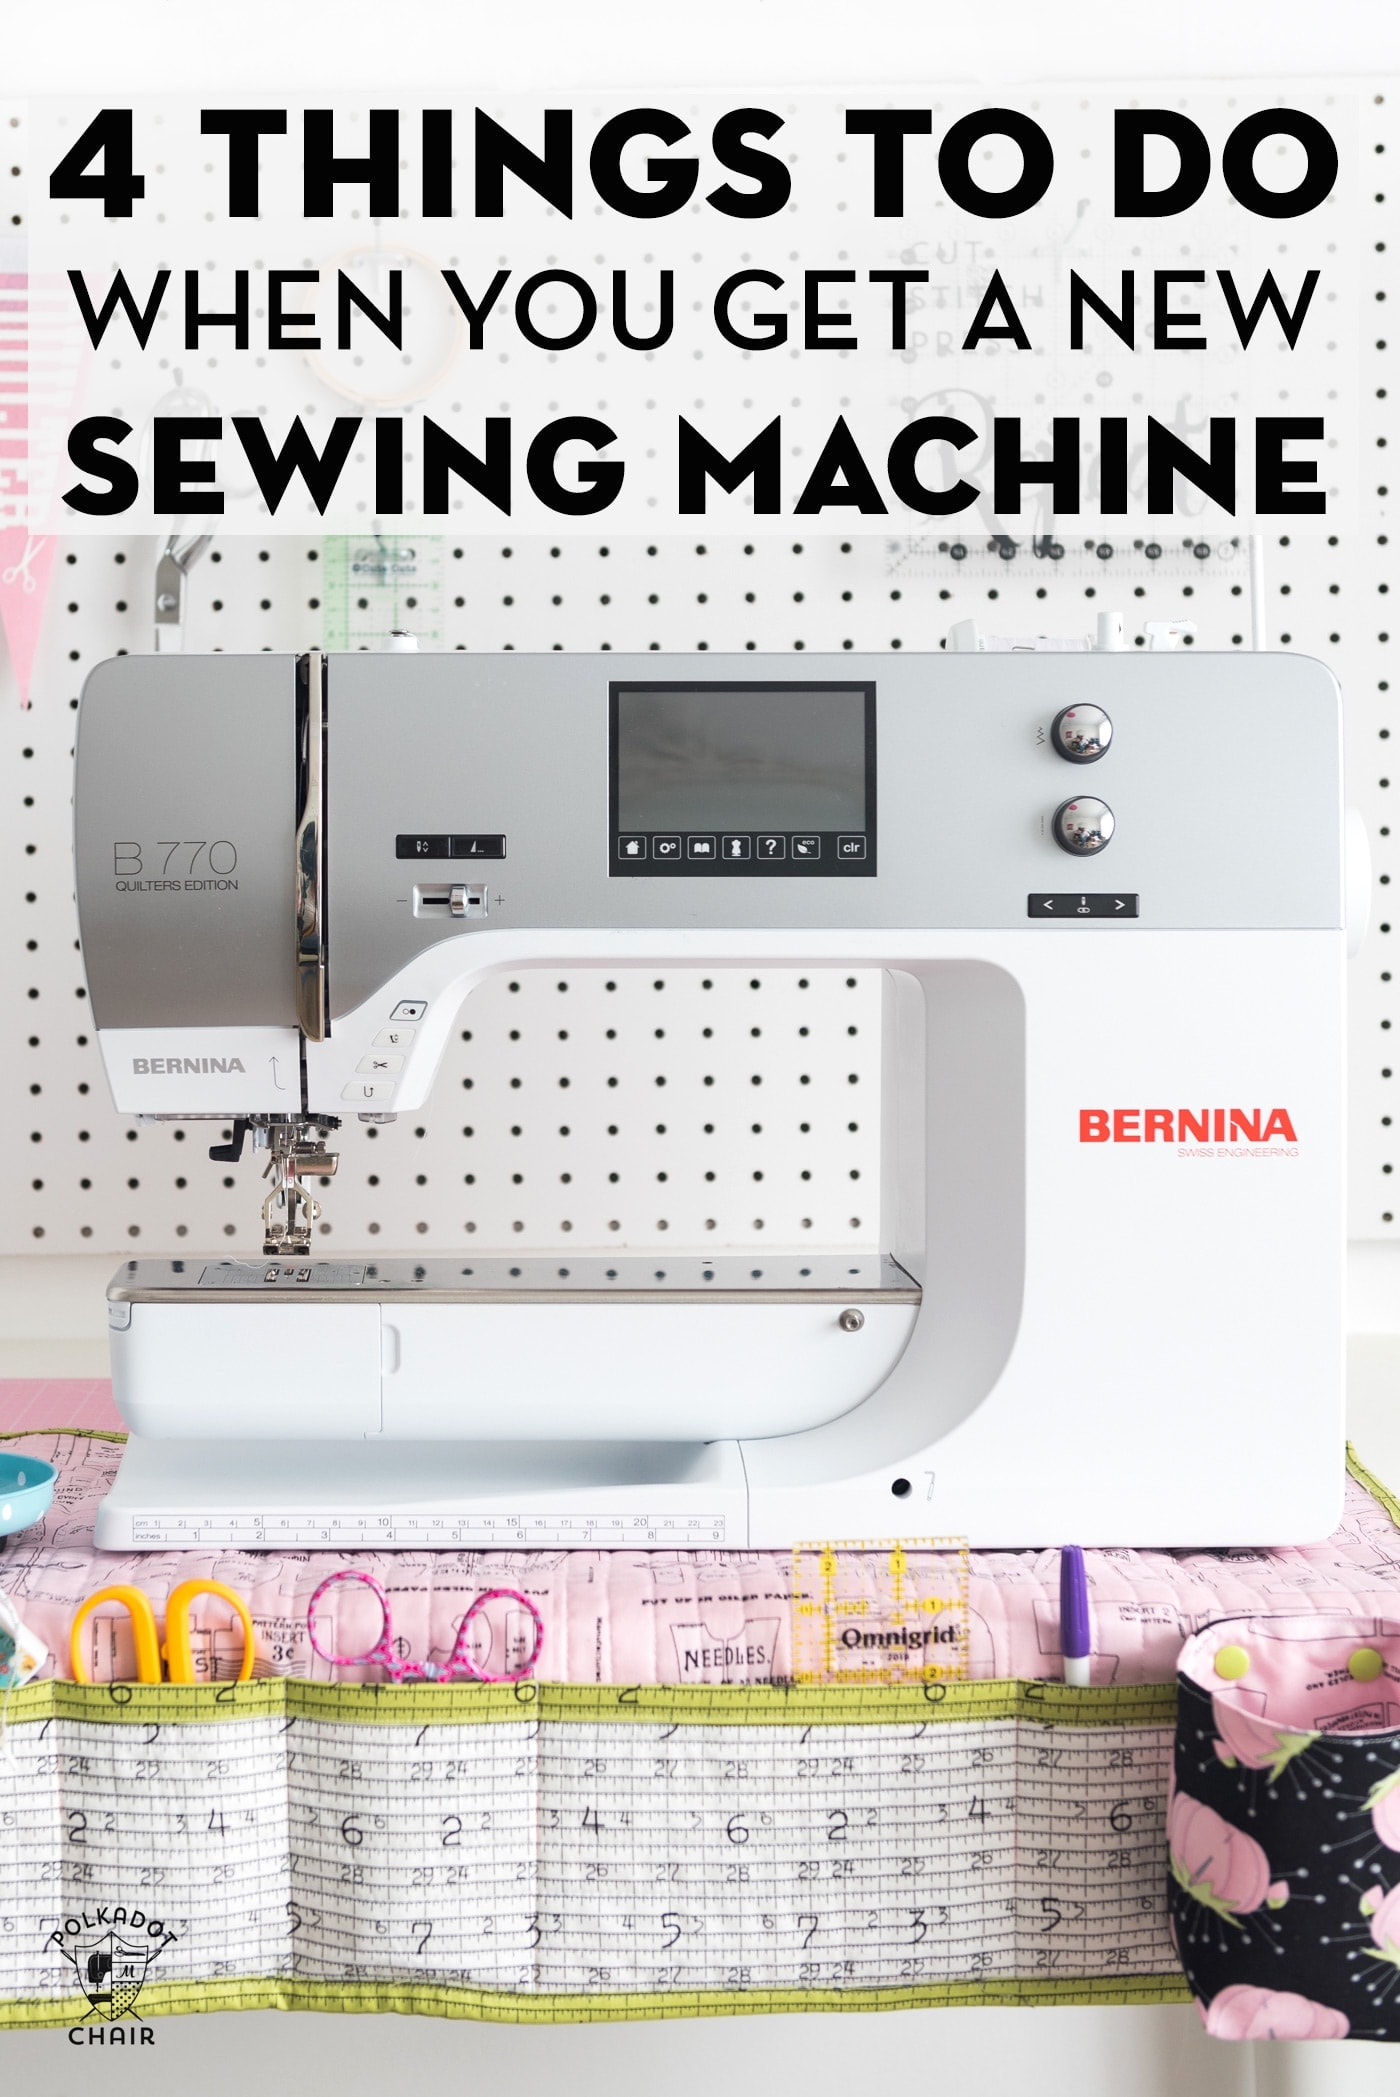 4 Things To Do When You Get a New Sewing Machine